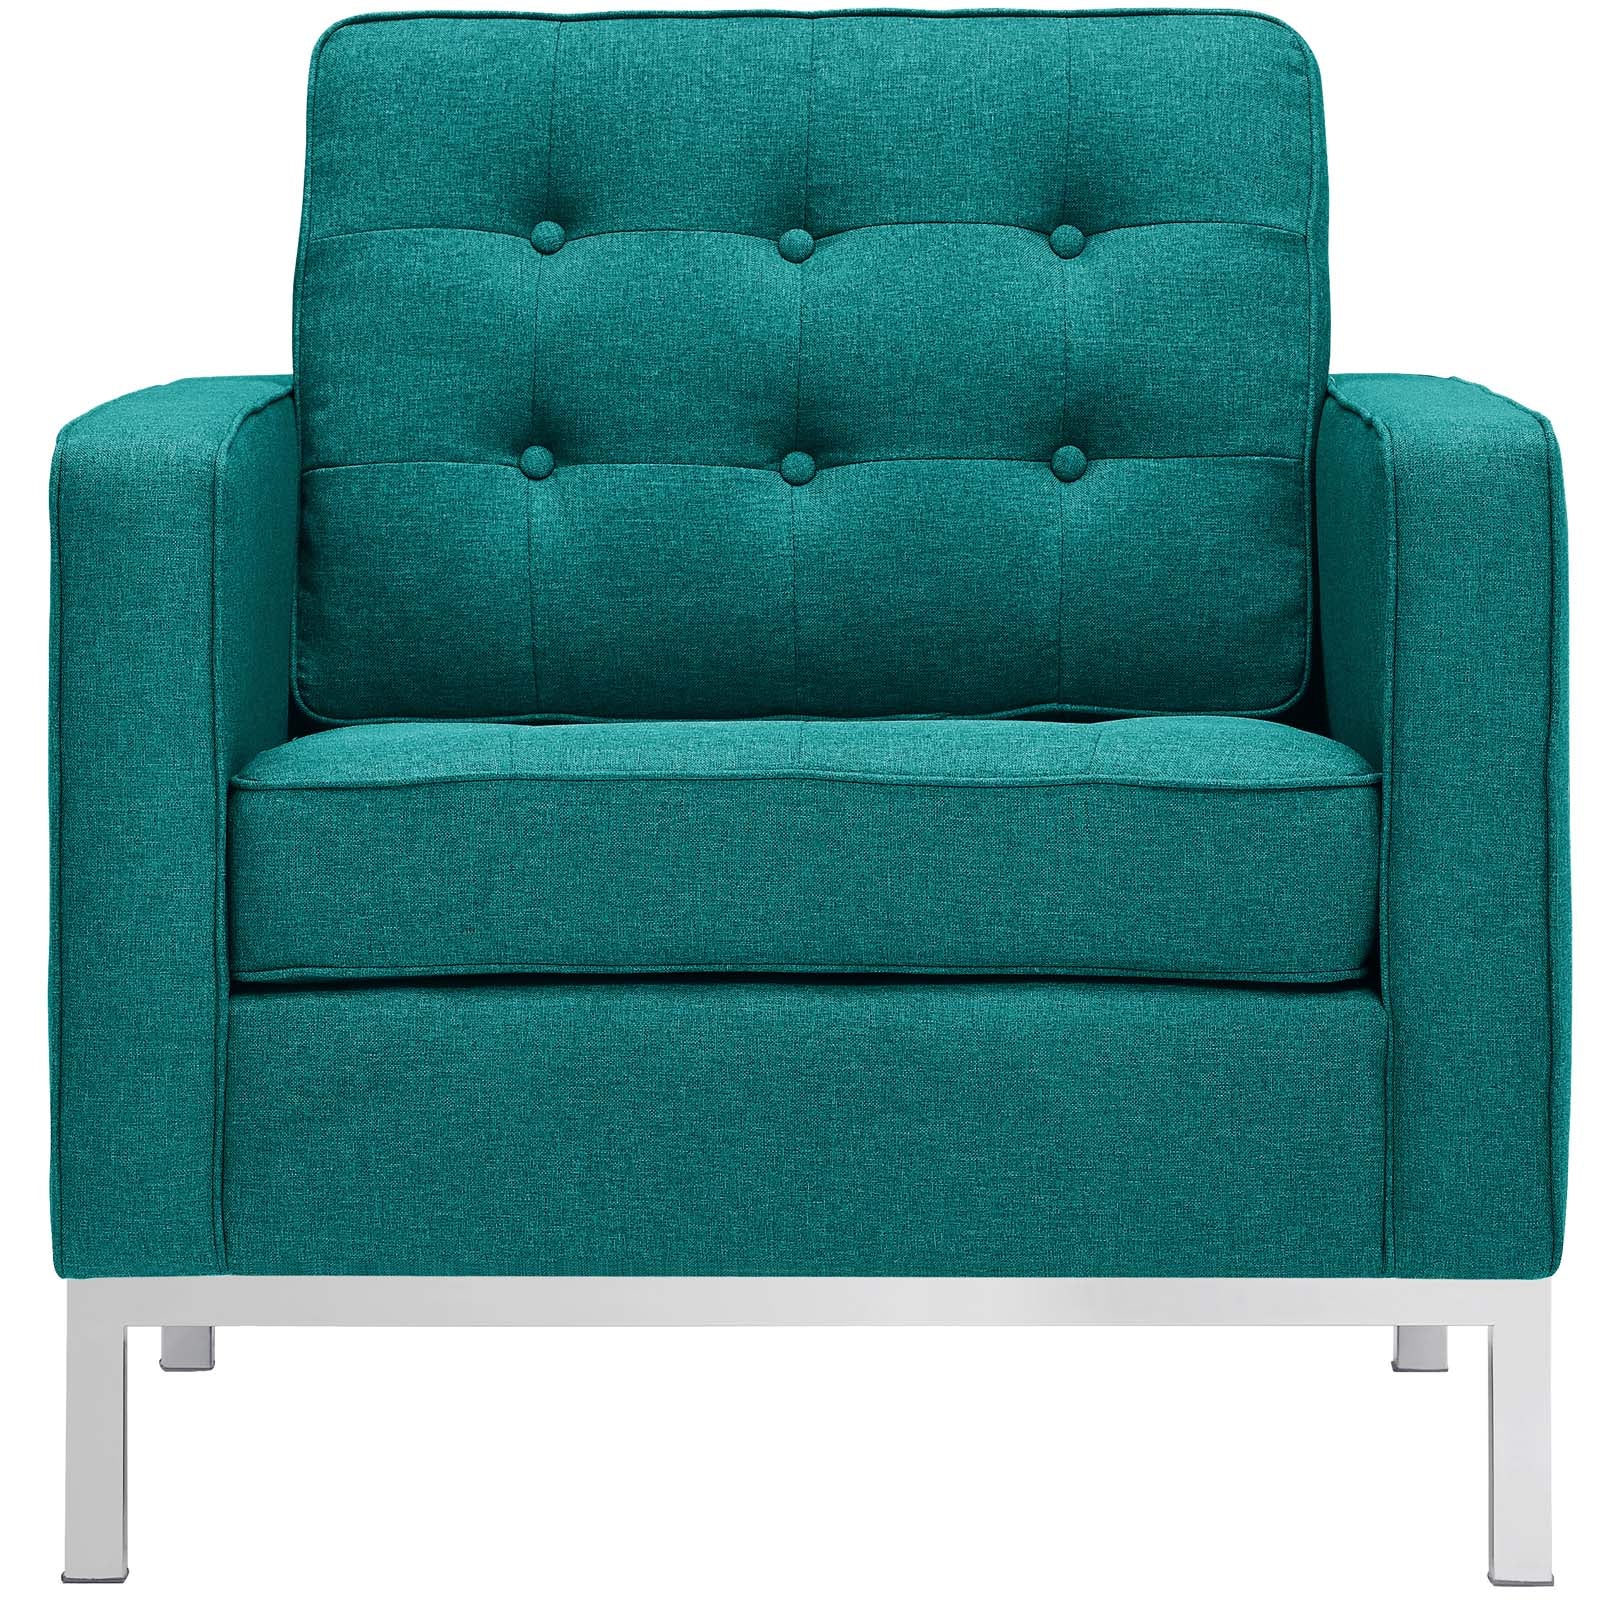 Modway Living Room Sets - Loft Armchairs Upholstered Fabric Teal (Set of 2)